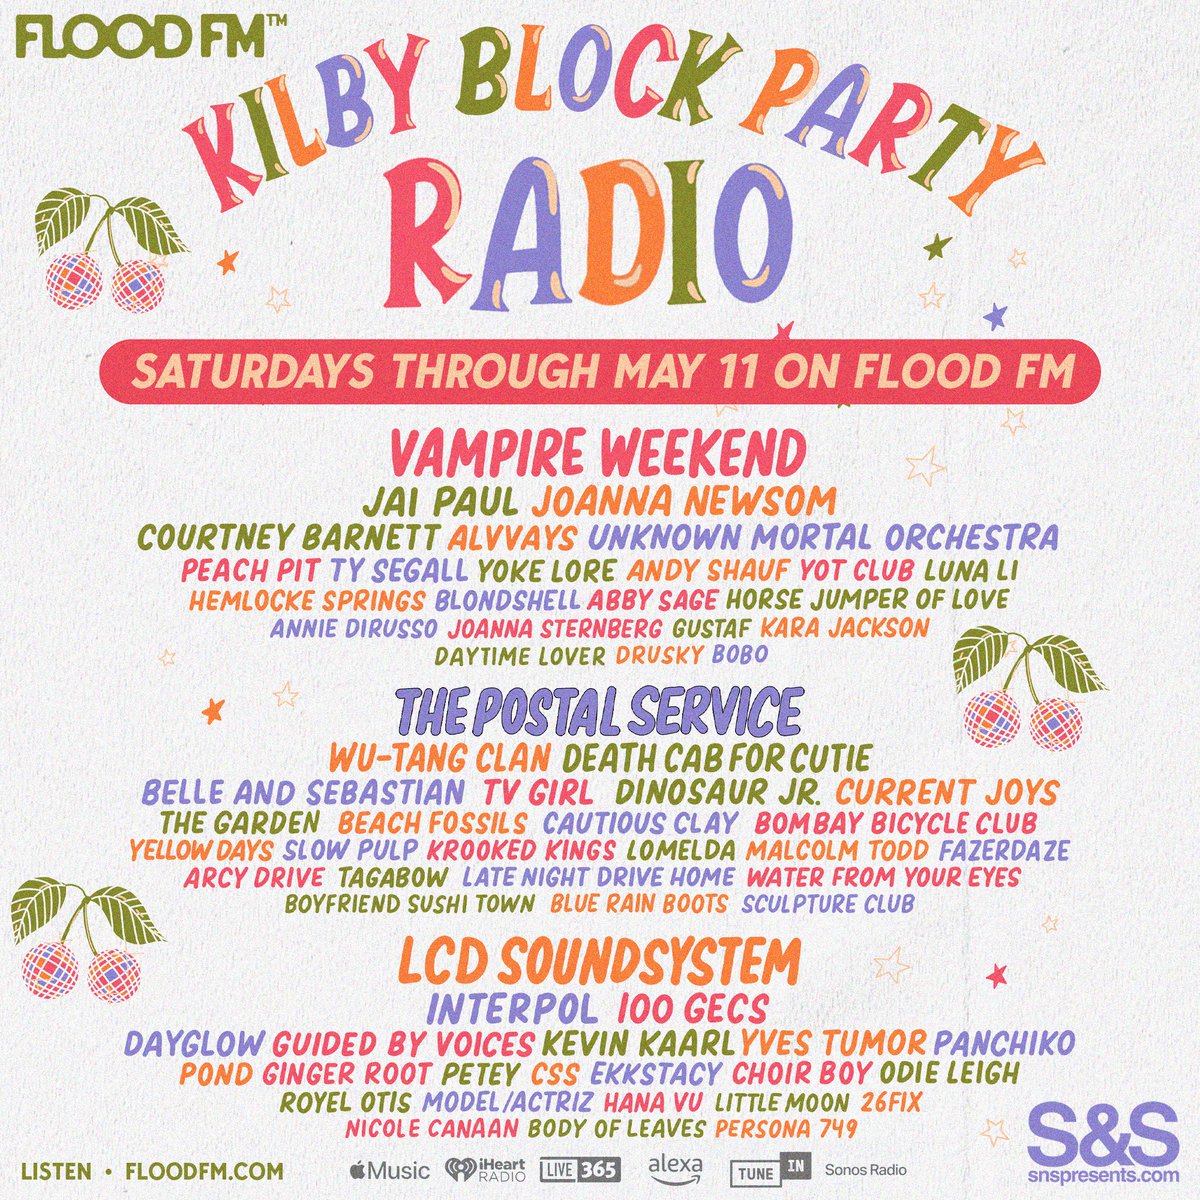 KILBY BLOCK PARTY RADIO! 📻🏔️🪩🕺💃 Today on your FLOOD FM 24 hours of nothing but music from all the fantastic artists performing next month at Utah's coolest music festival @kilbyblockparty @floodmagazine @kilbycourt @vampireweekend @Interpol @dcfc @alvvaysband @jai_paul